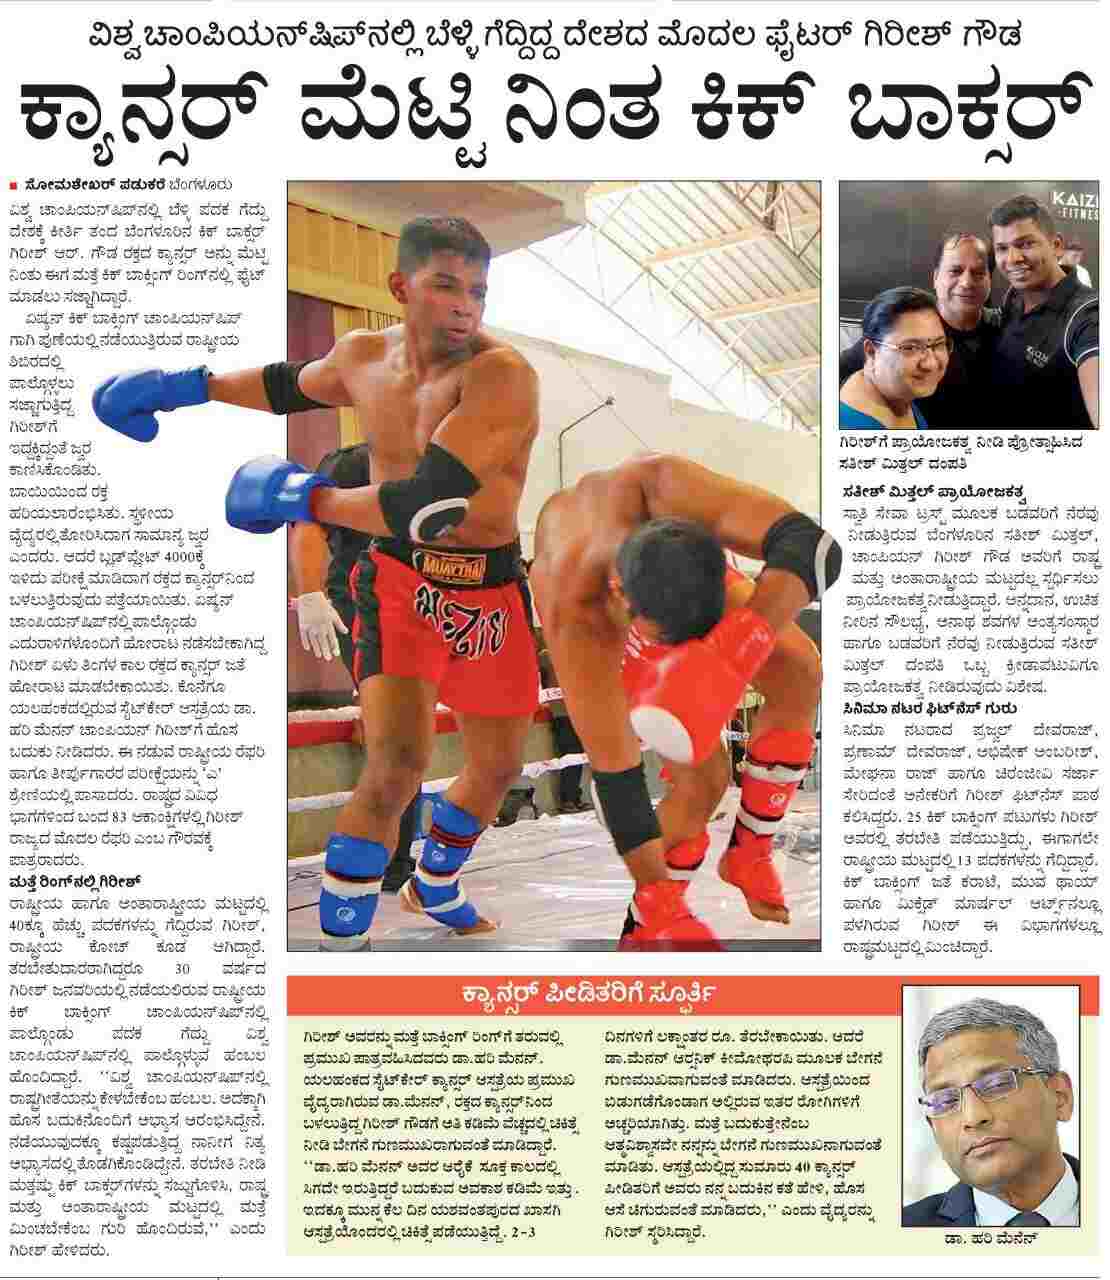 1st Fighter of the Country to Win Silver in the World Championships